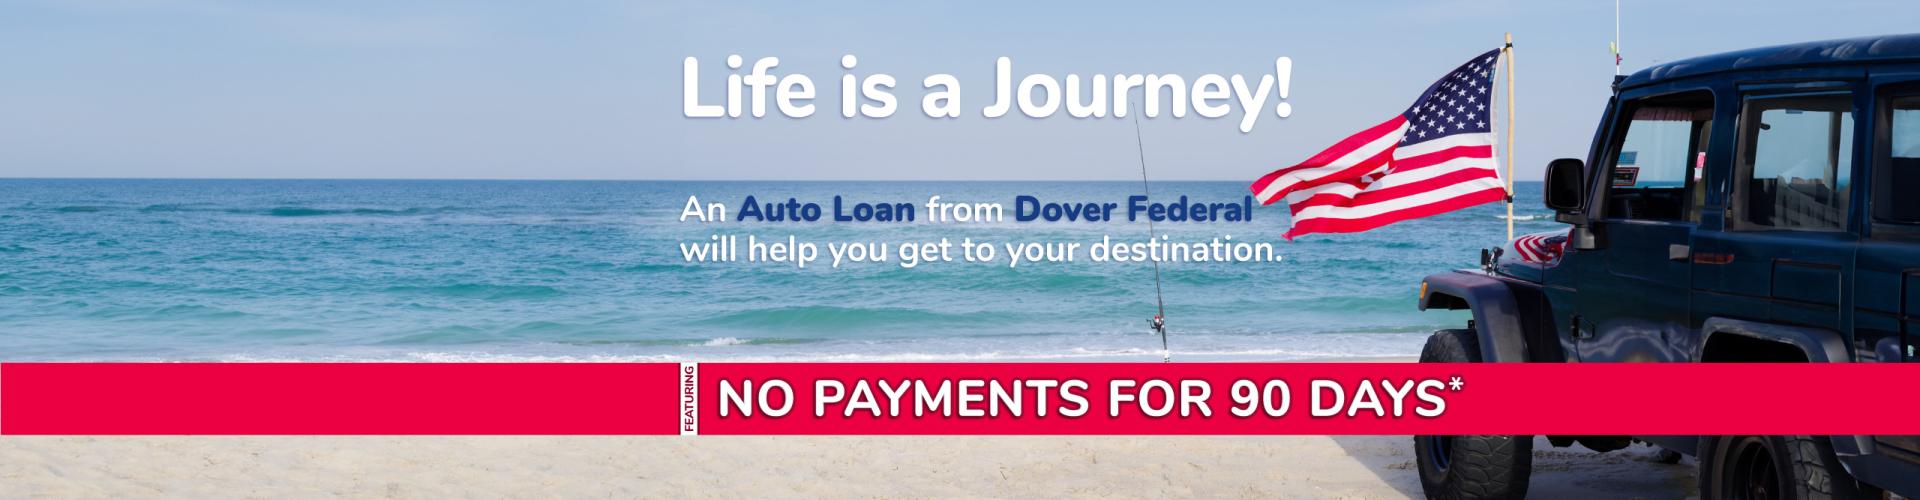 Life is a Journey! No pay for up to 90 days!^